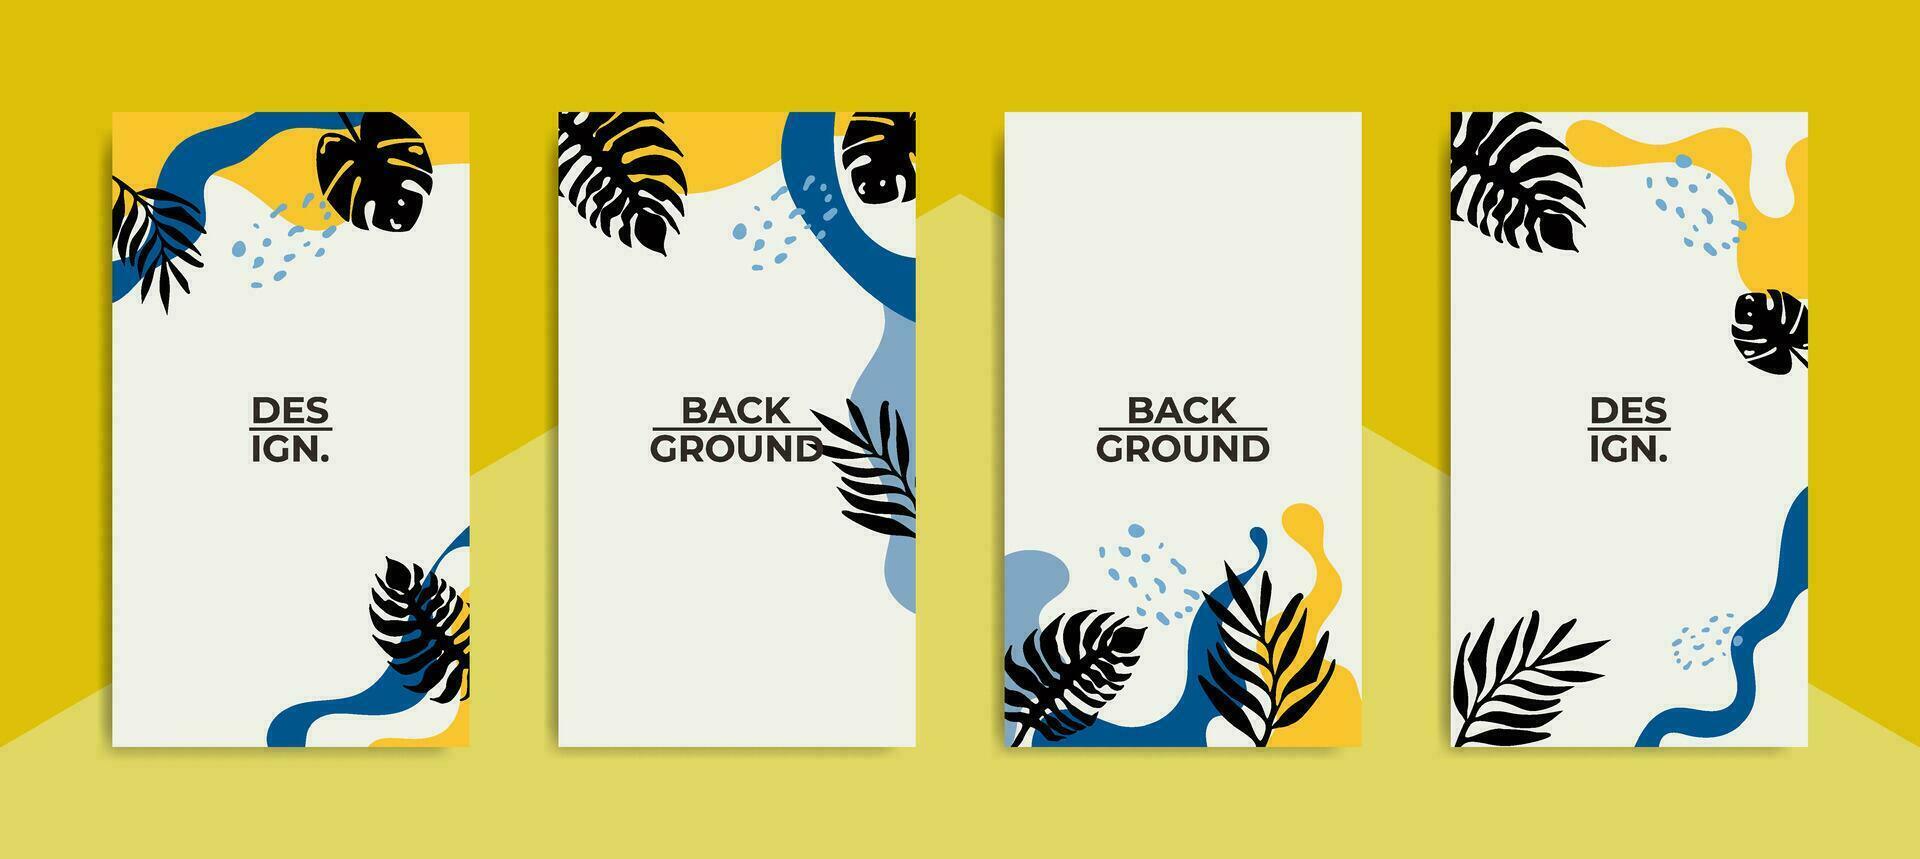 Editable Trendy background template. perfect for social media stories, ads, posters, banners, etc vector